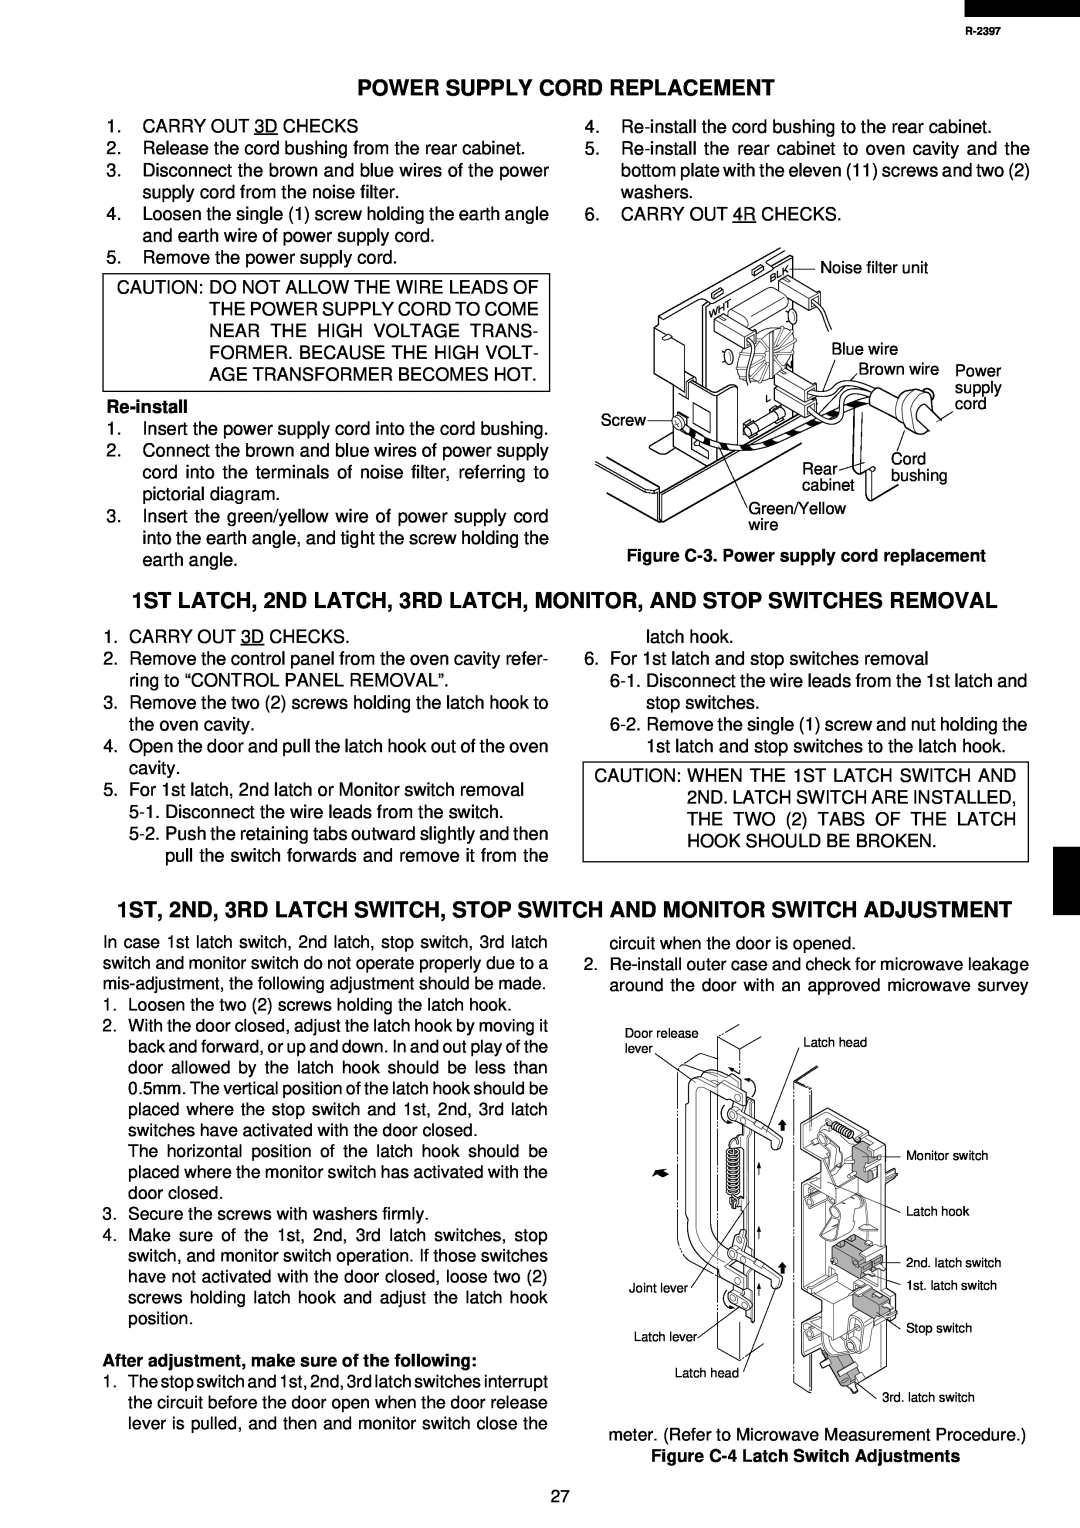 Sharp R-2397 service manual Power Supply Cord Replacement 